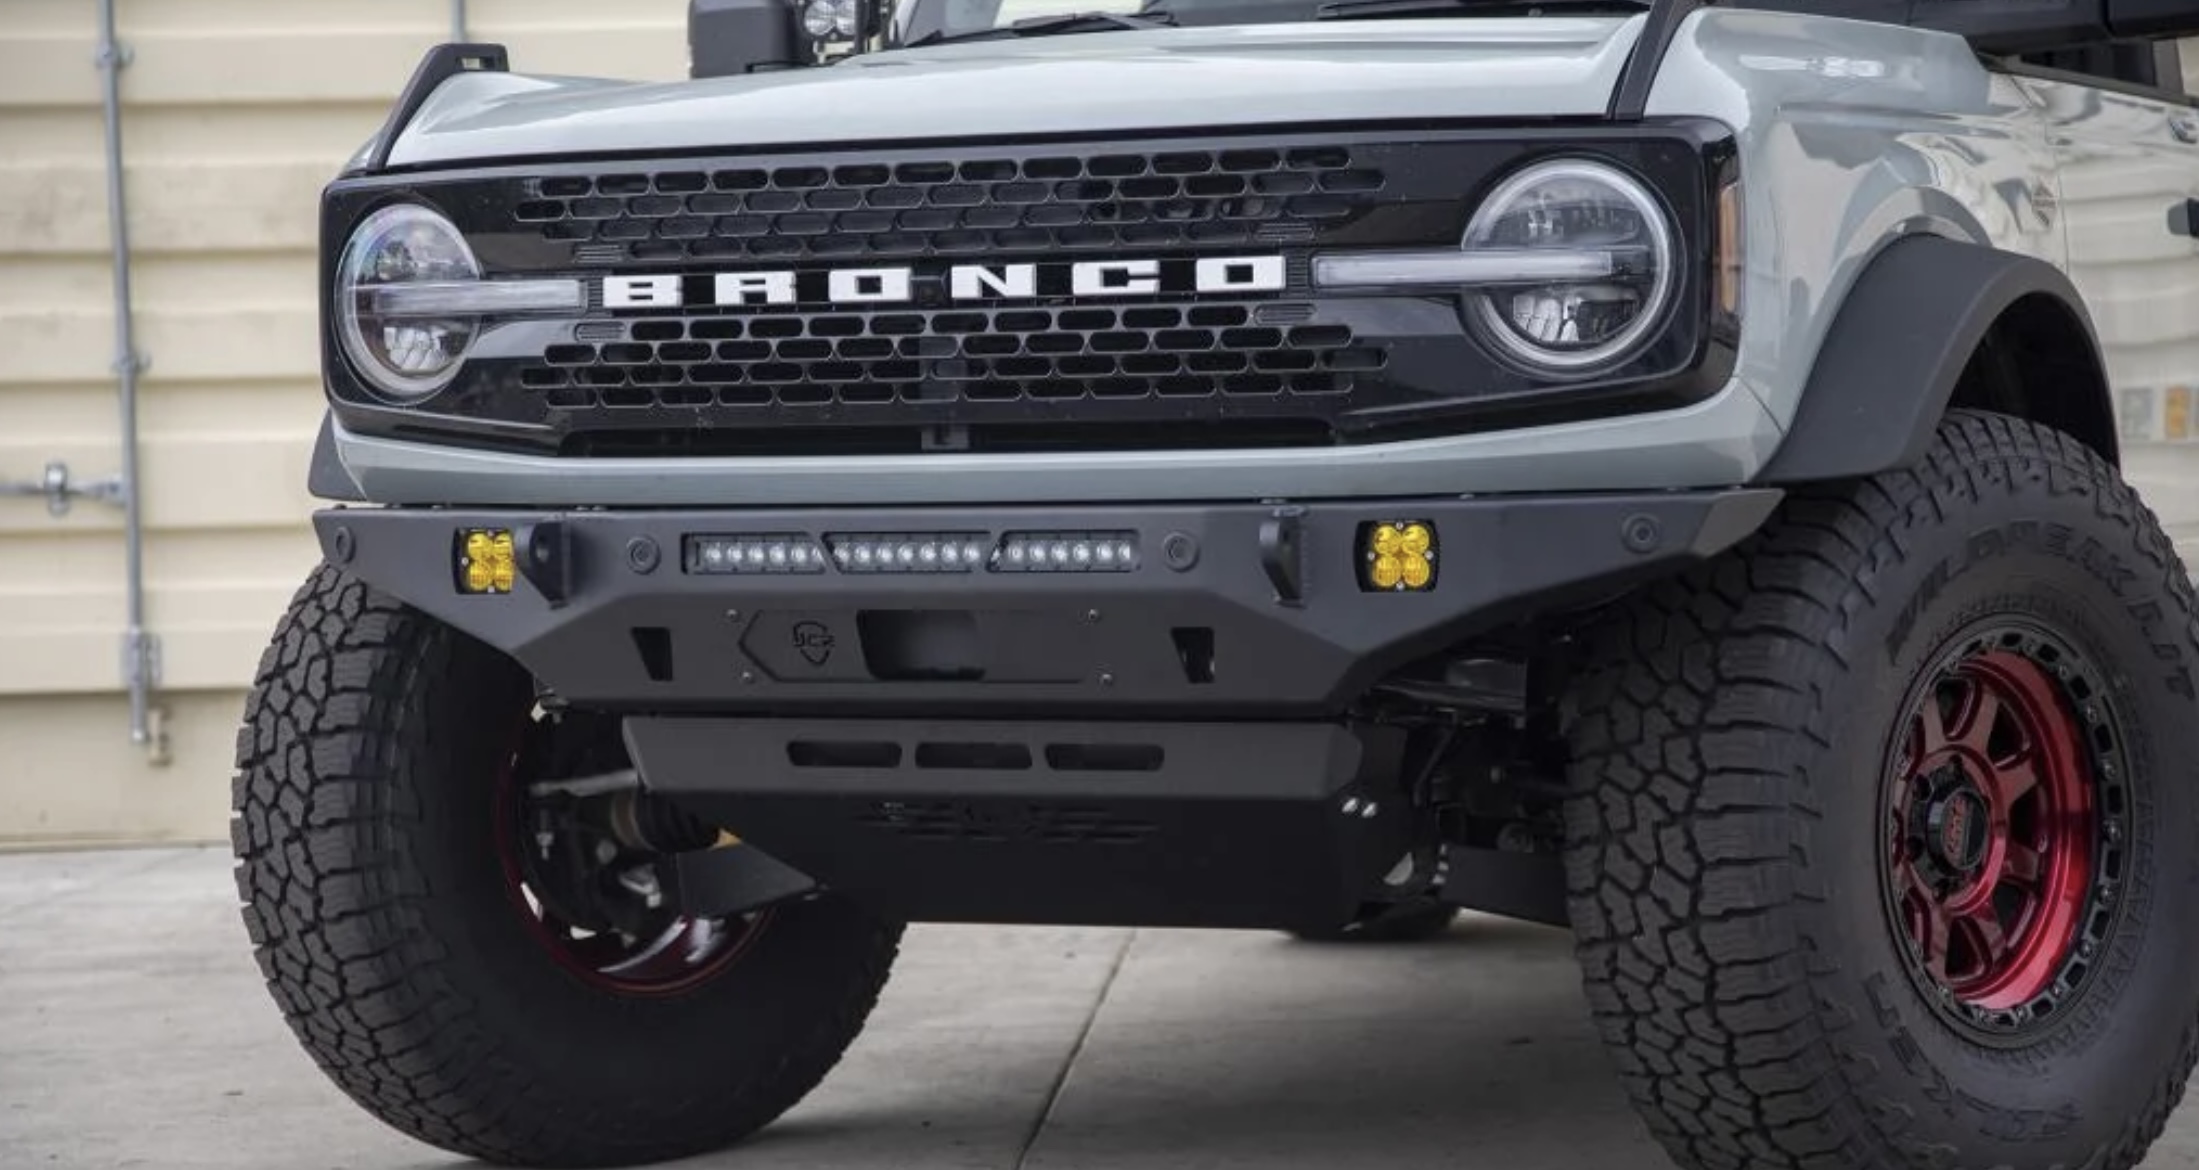 Ford Bronco JcrOffroad’s new Crusader front and rear bumper! A72C8800-A5A5-4DCD-BA47-99FF1DC99AE5